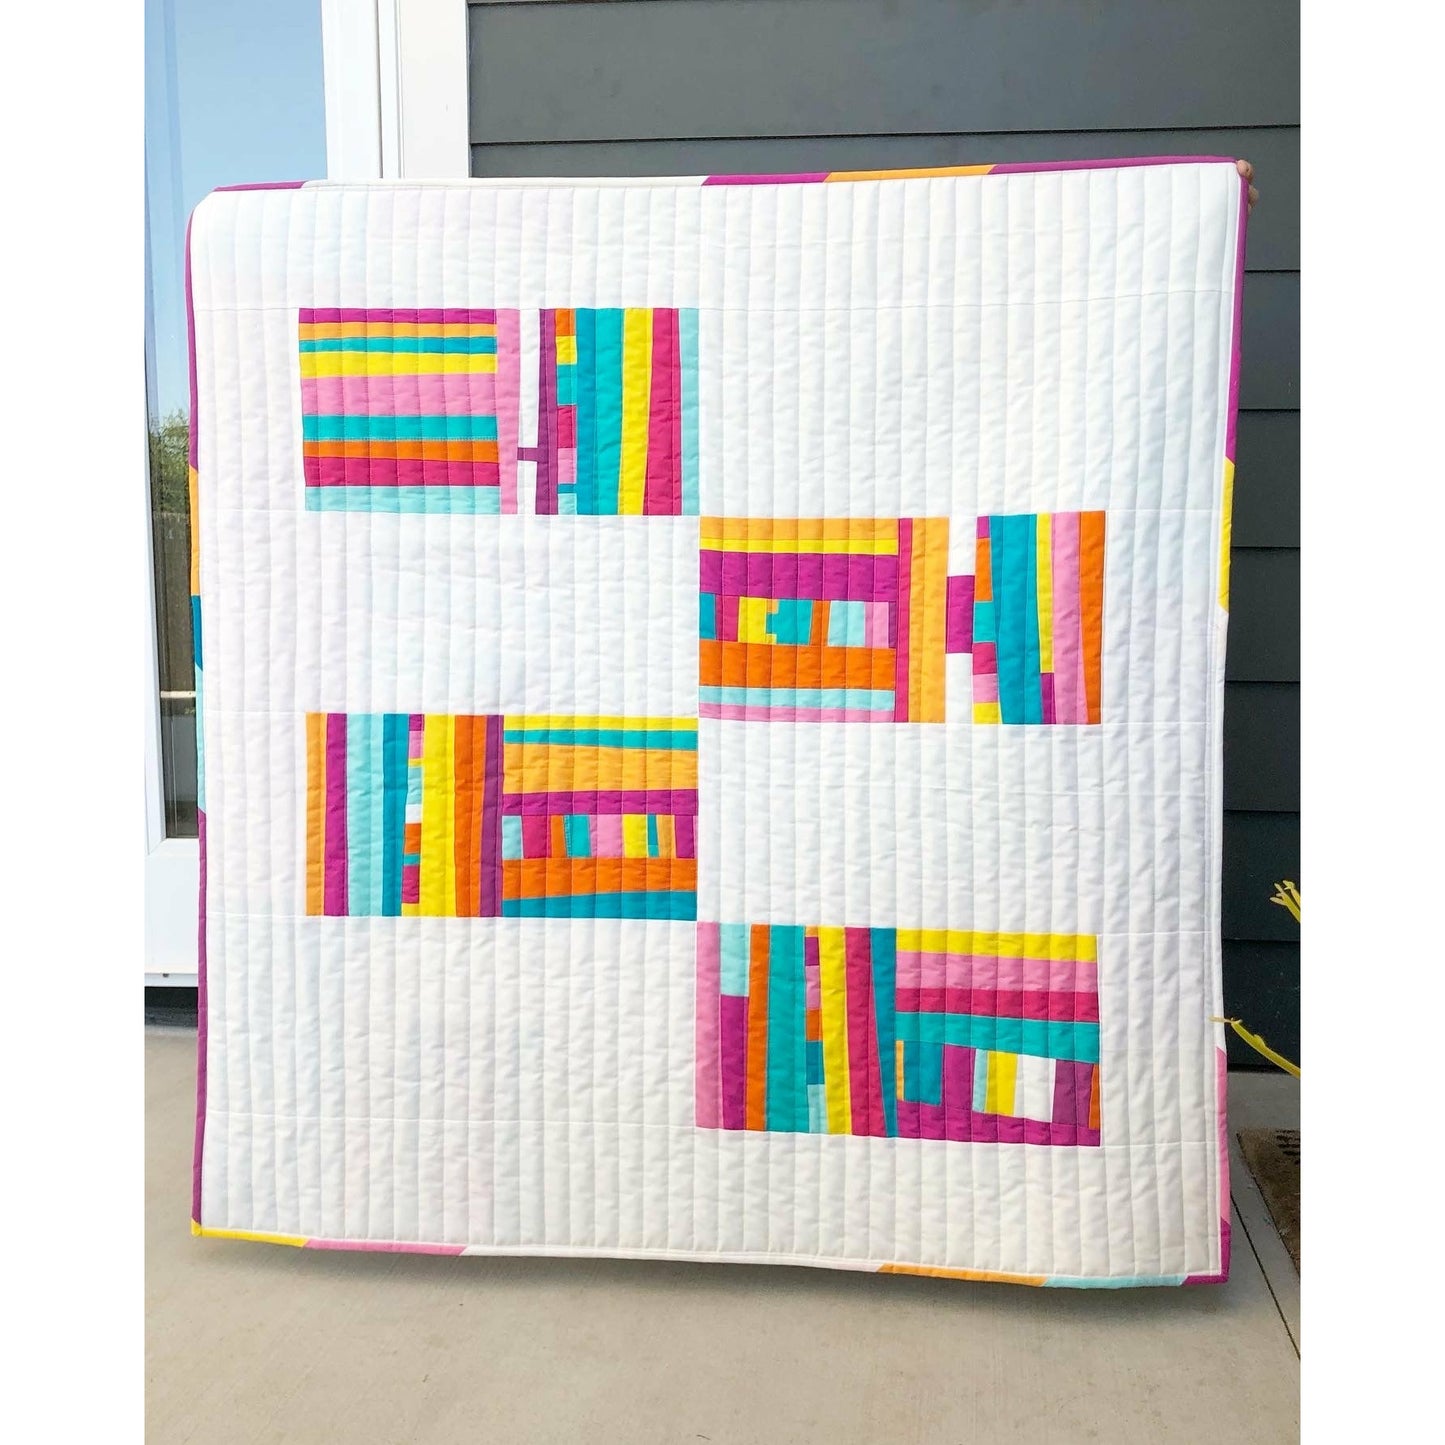 Baby/Crib Small Lap Quilt- Modern, Improv, Handmade, One of a Kind